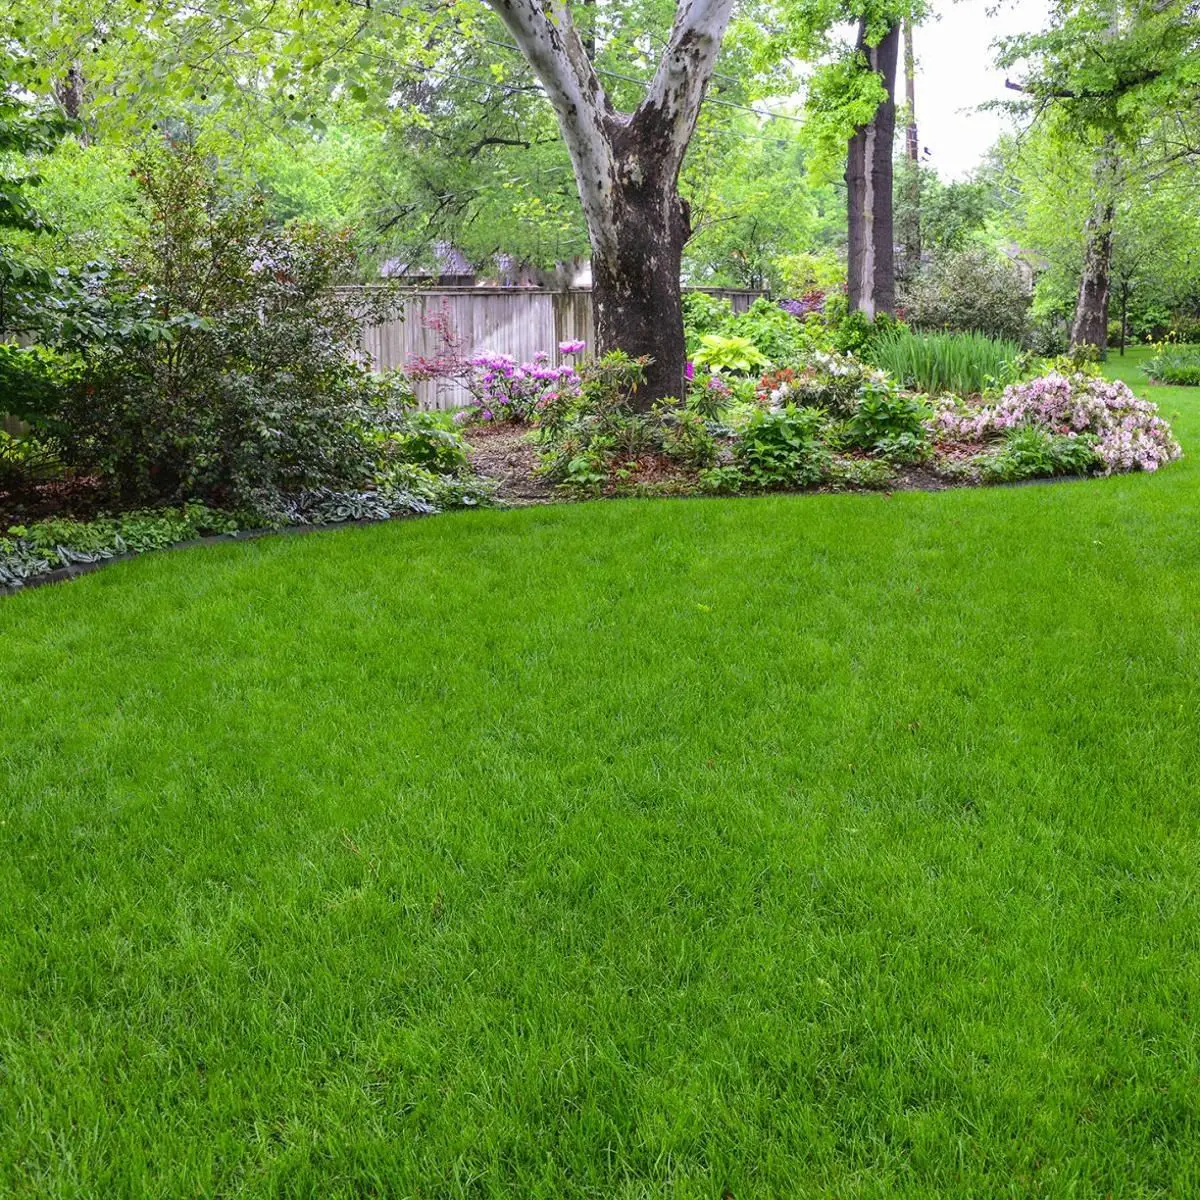 Mow taller for a thicker lawn